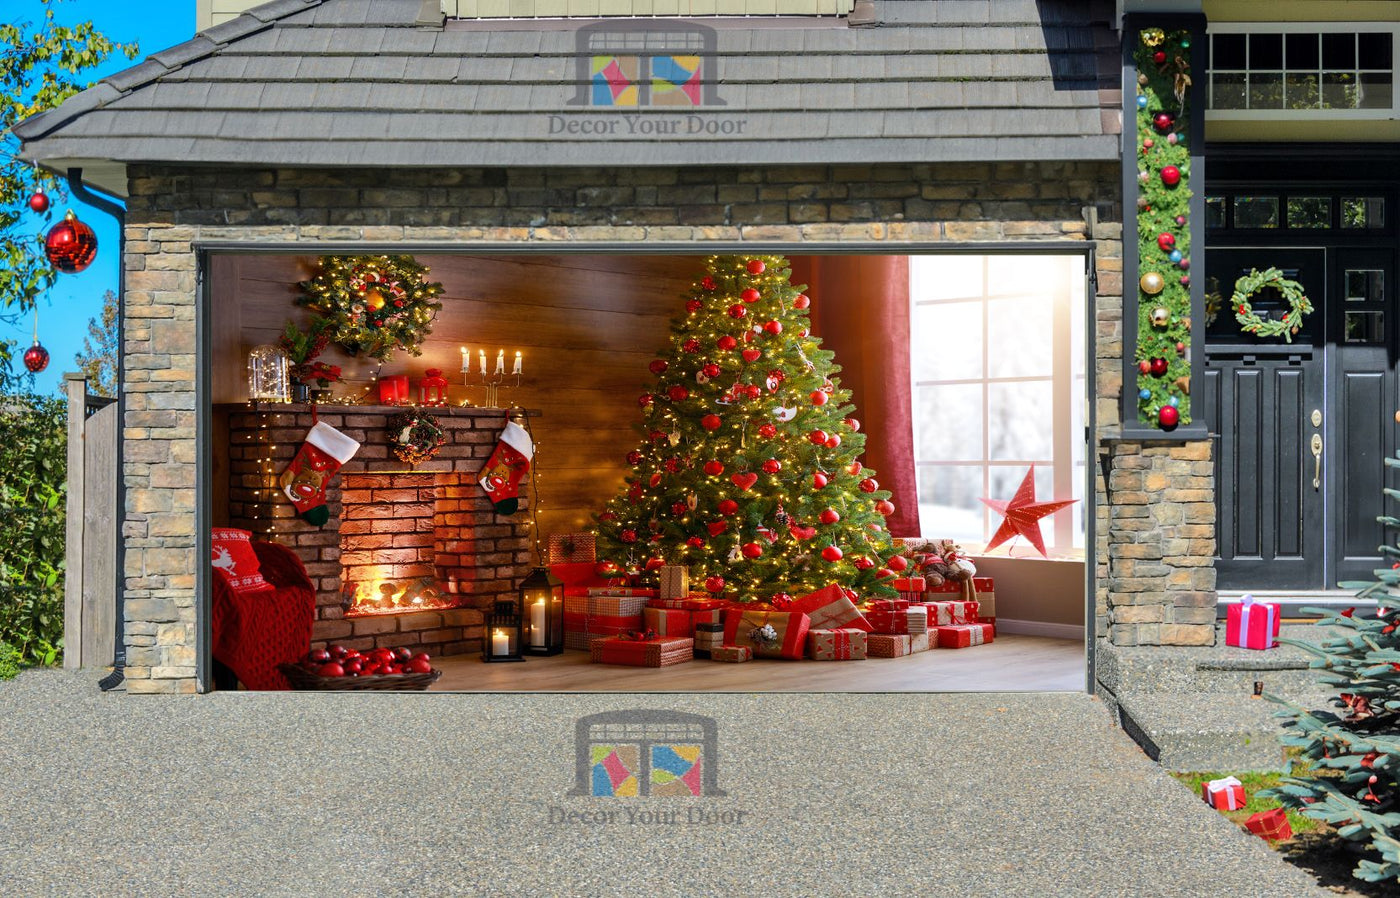 Interior Christmas Magic Glowing Tree Fireplace Gifts Garage Door Wrap Cover Christmas Decoration